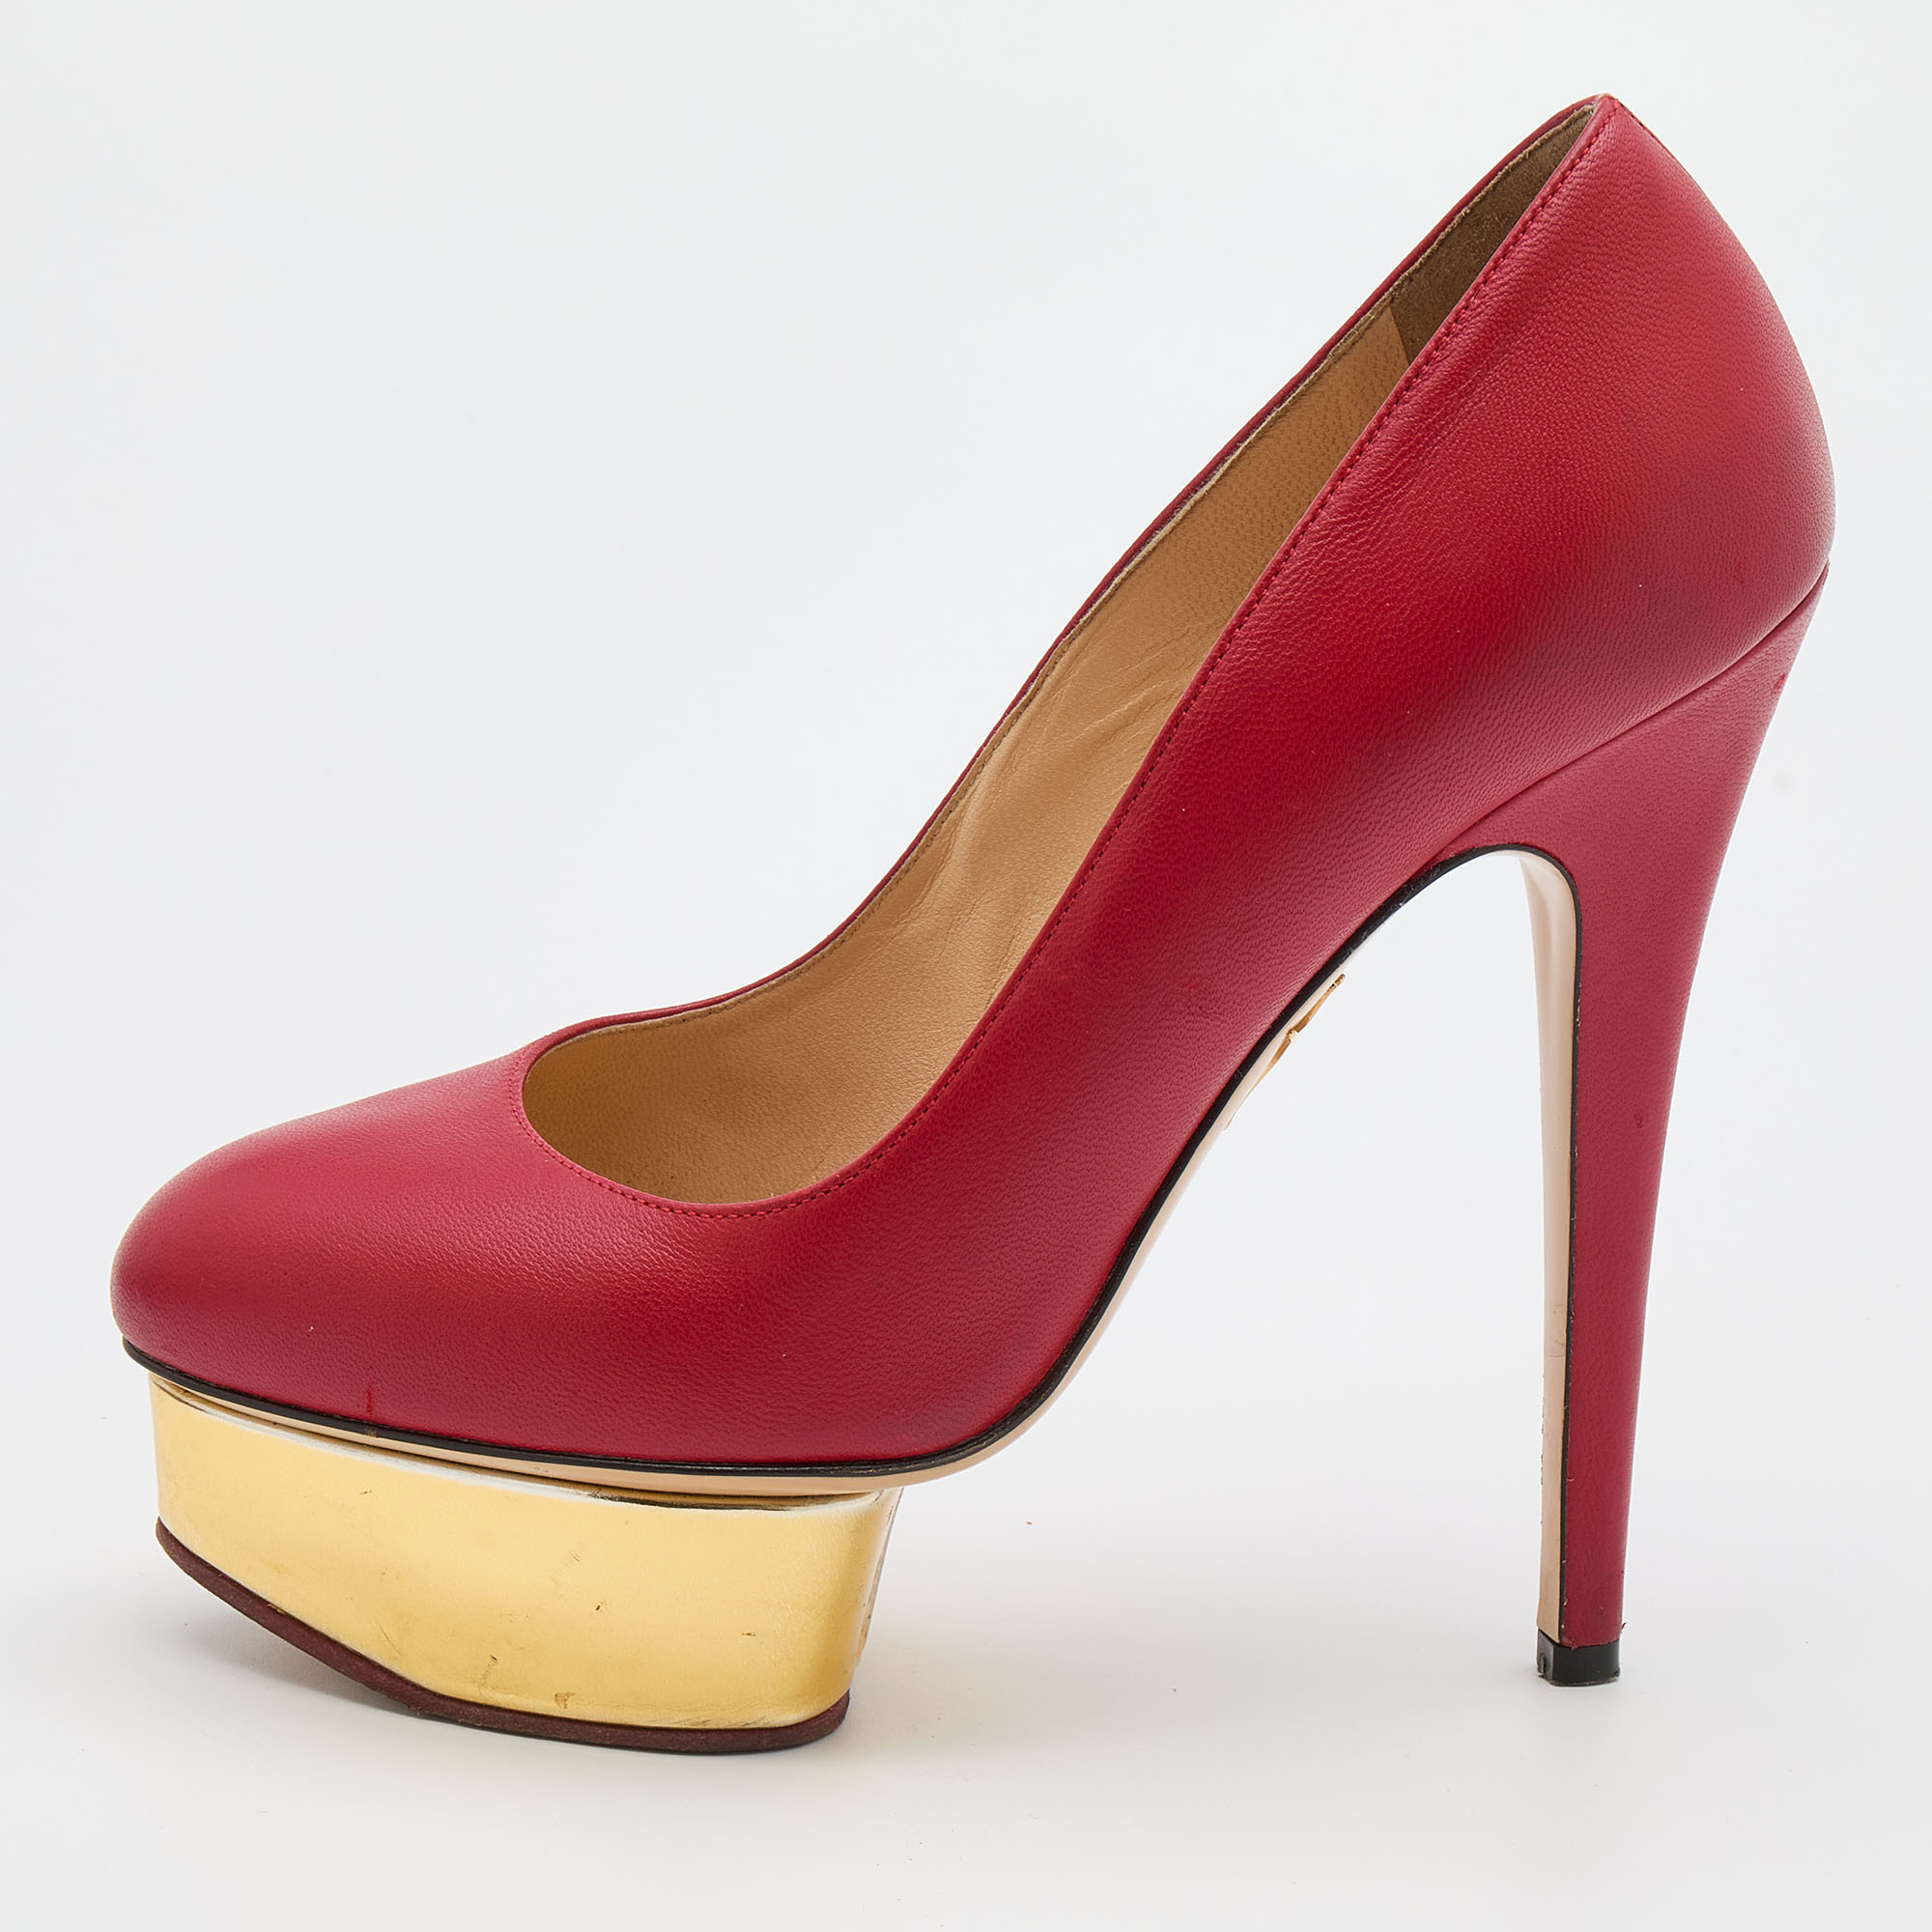 Charlotte olympia red leather dolly platform pumps size 37